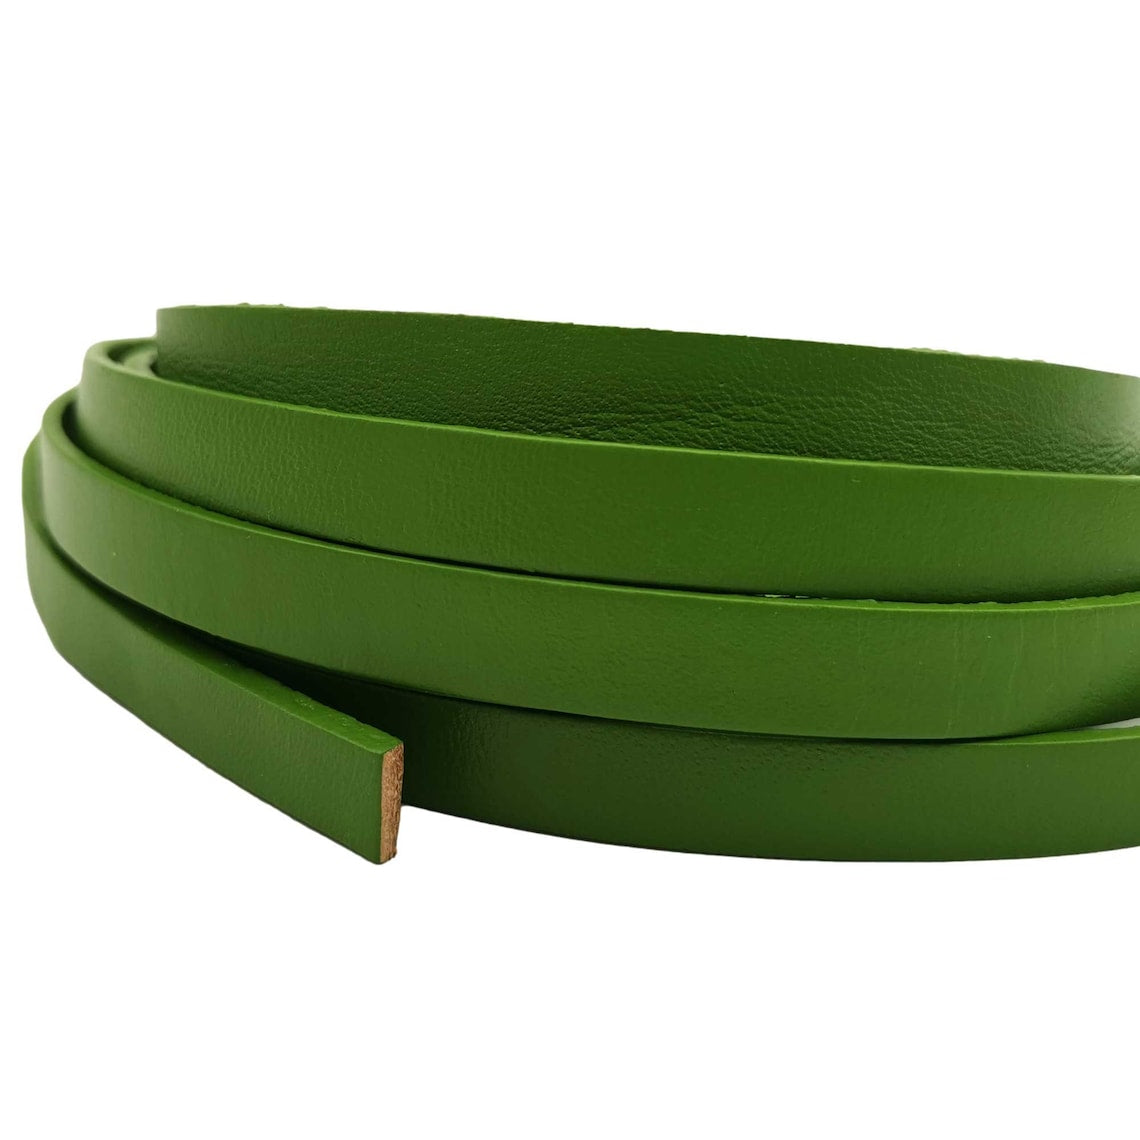 shapesbyX-10mm Flat Leather Strip 10mmx2mm Leather Strap for Jewelry Making Watchband Lime Green